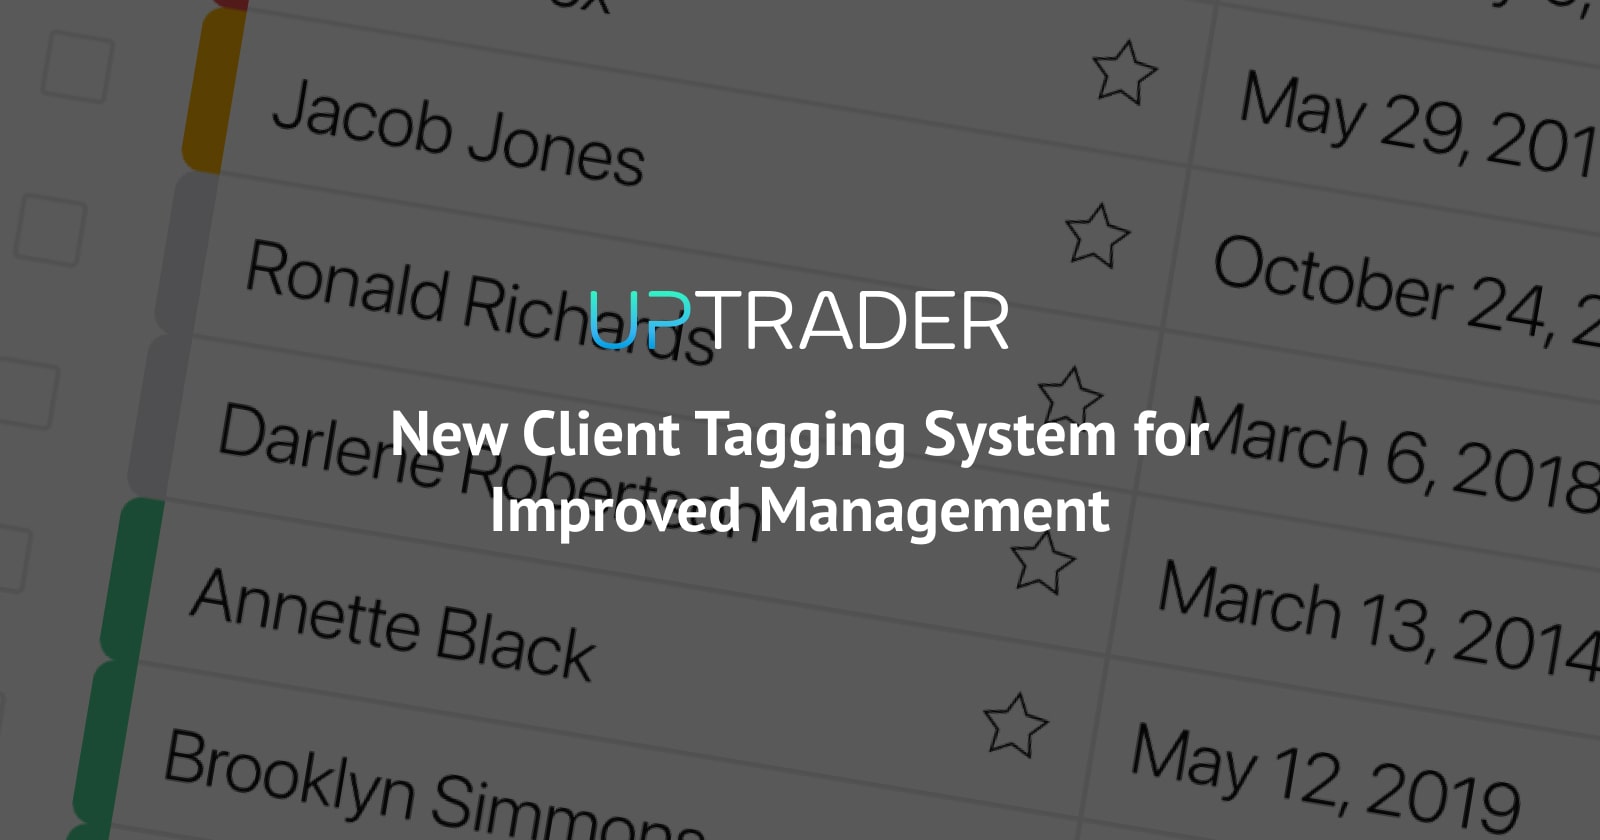 UpTrader Introduces a Tag System for Optimized Client Management